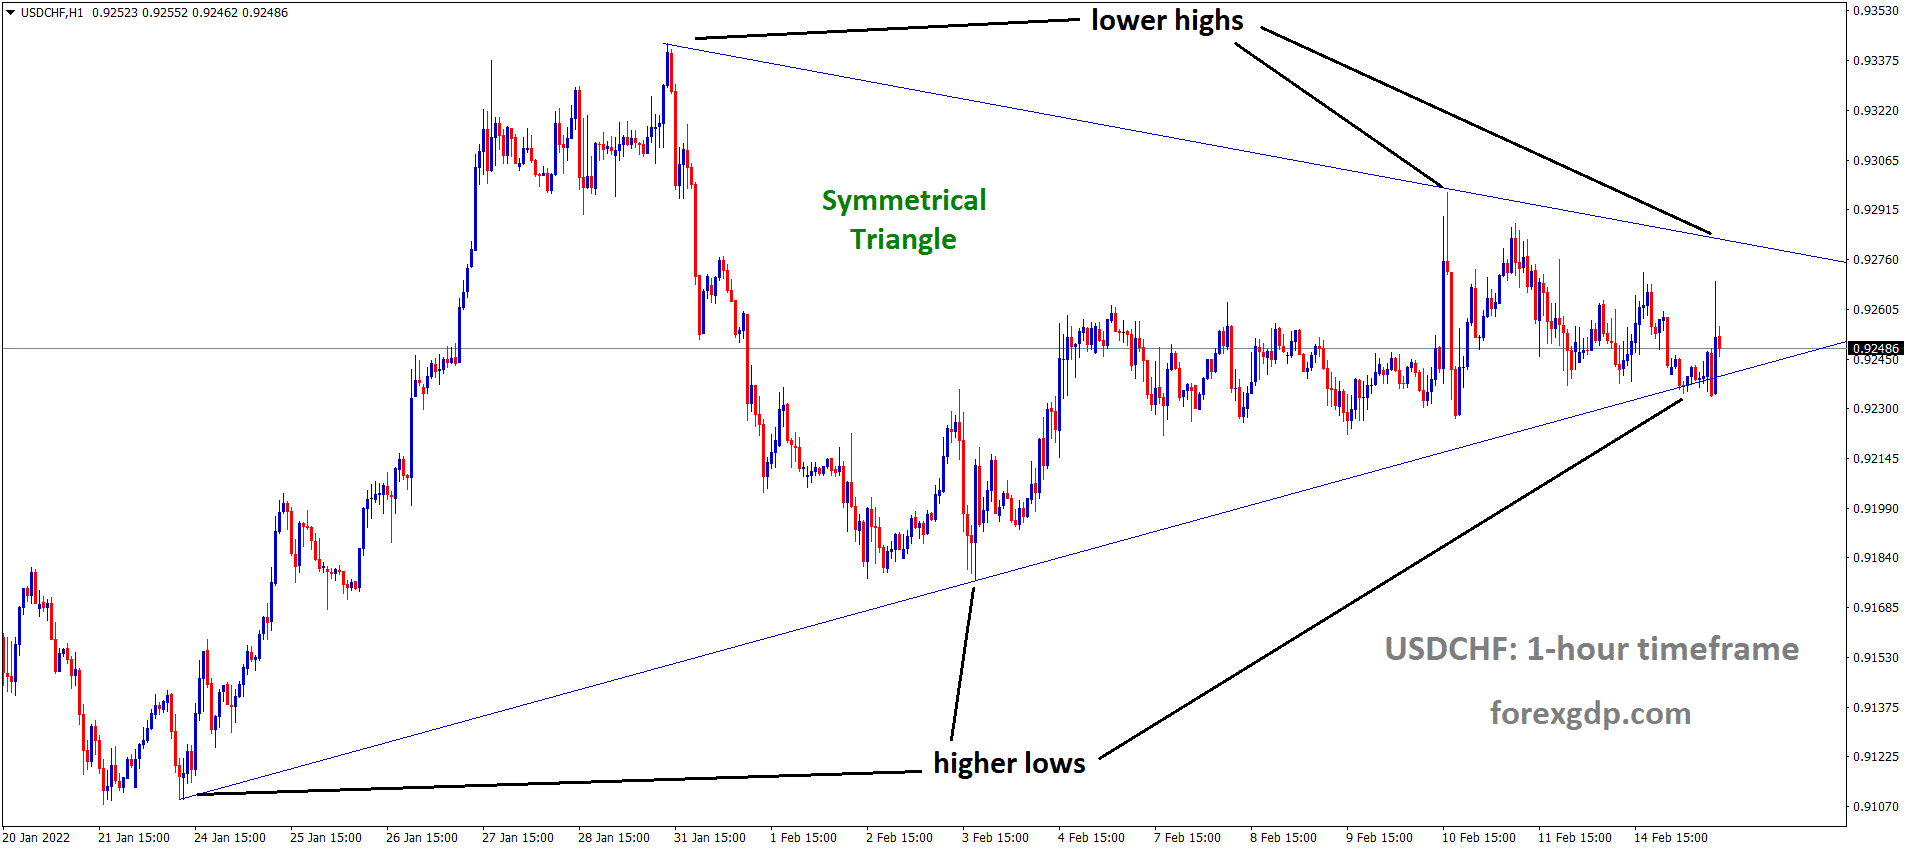 USDCHF is moving in the Symmetrical triangle pattern and the market has rebounded from the Bottom area of the pattern